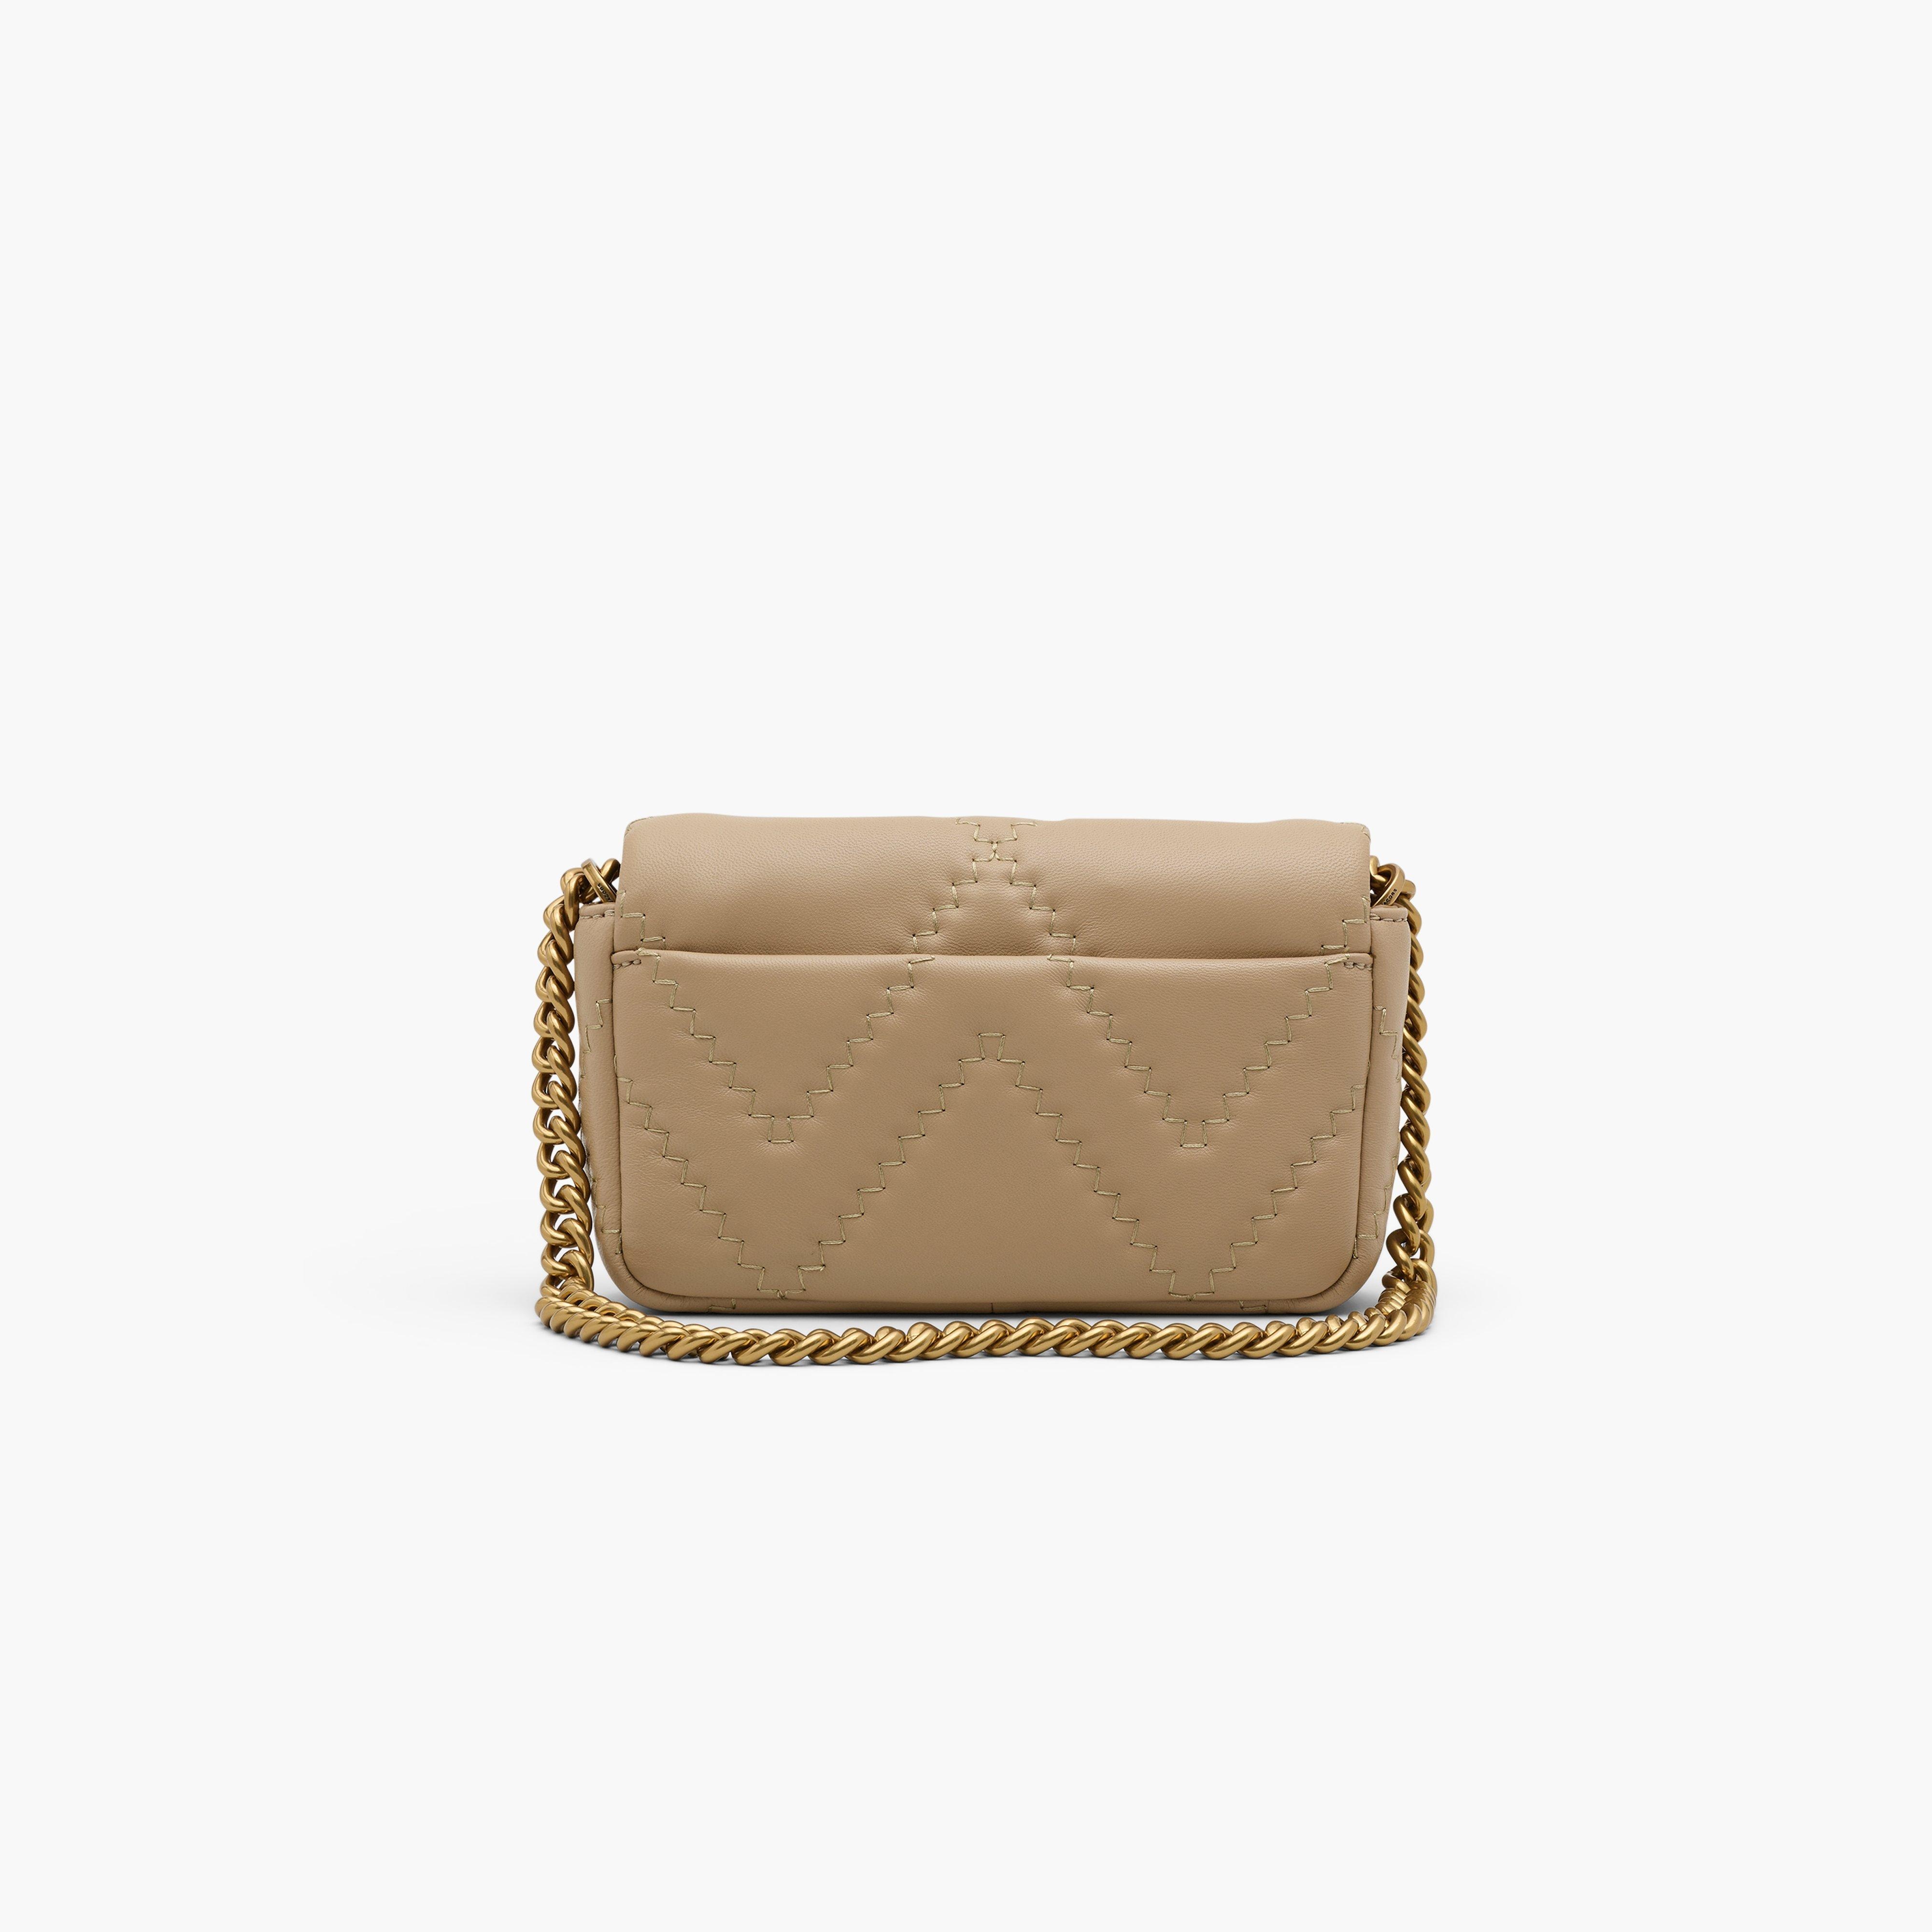 THE QUILTED LEATHER J MARC MINI BAG - 4